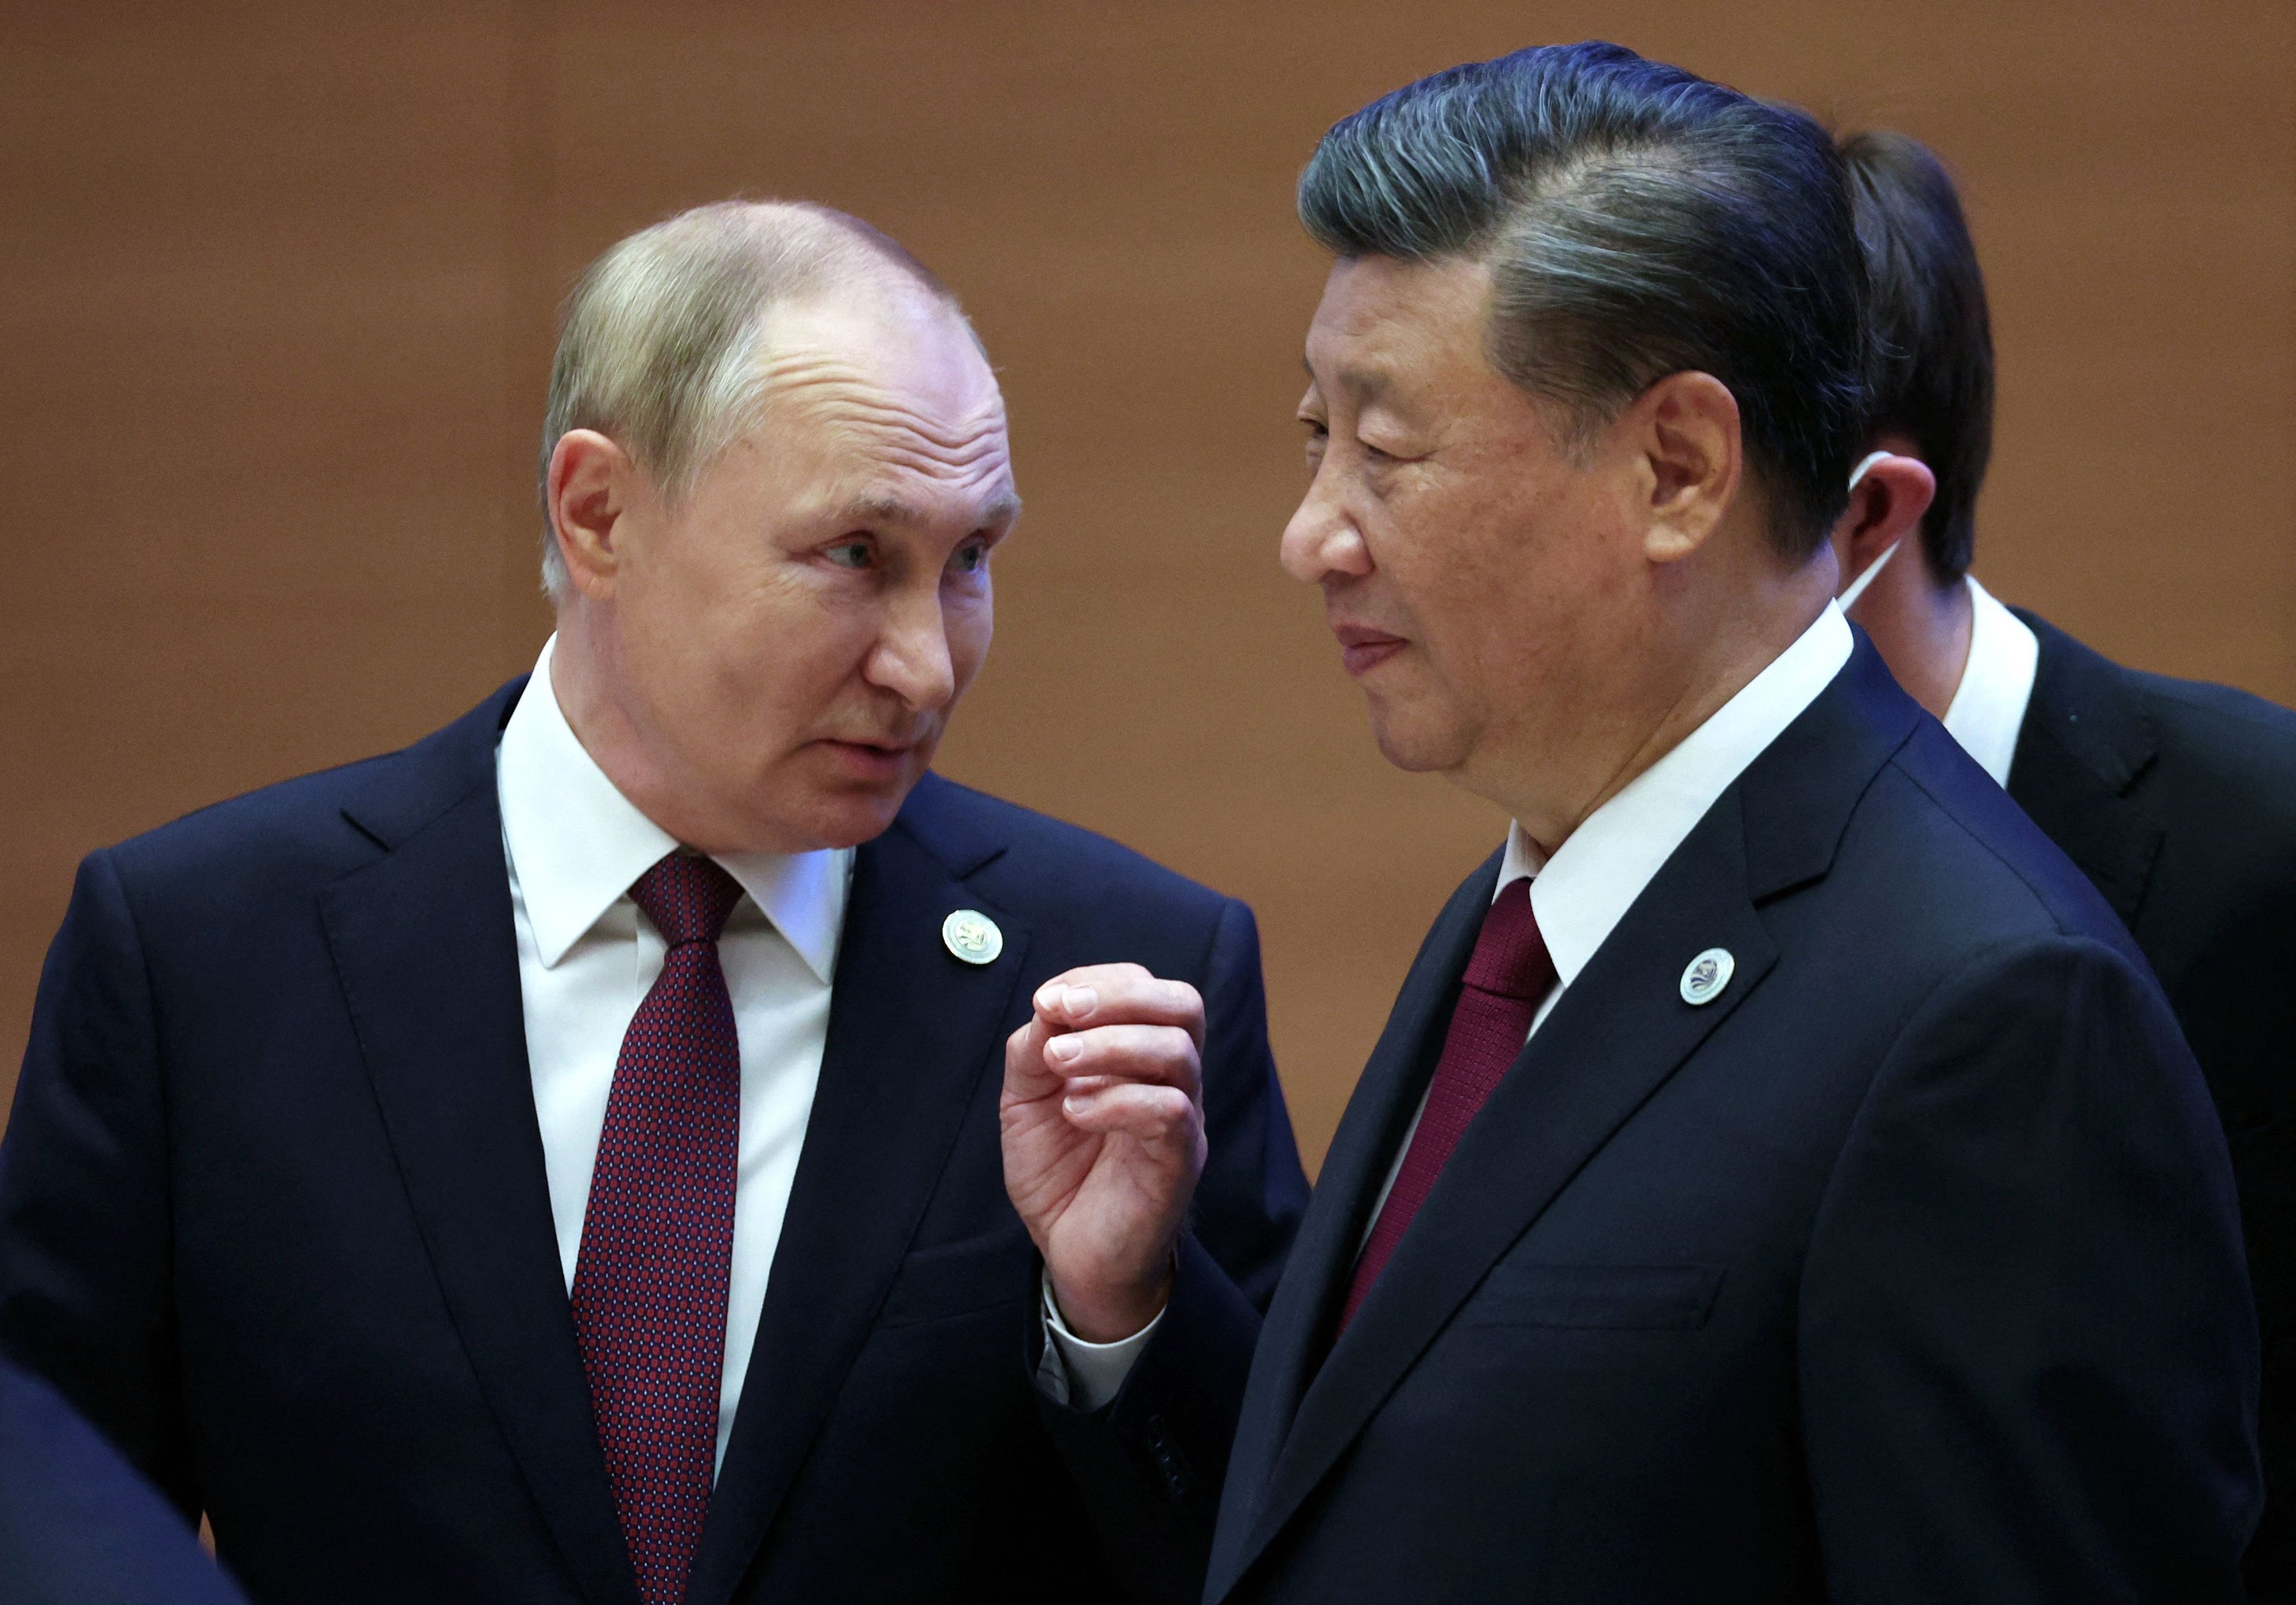 Russia’s Vladimir Putin speaks to Chinese President Xi Jinping during the SCO leaders’ summit in Samarkand on September 16. Photo: AFP via Getty Images